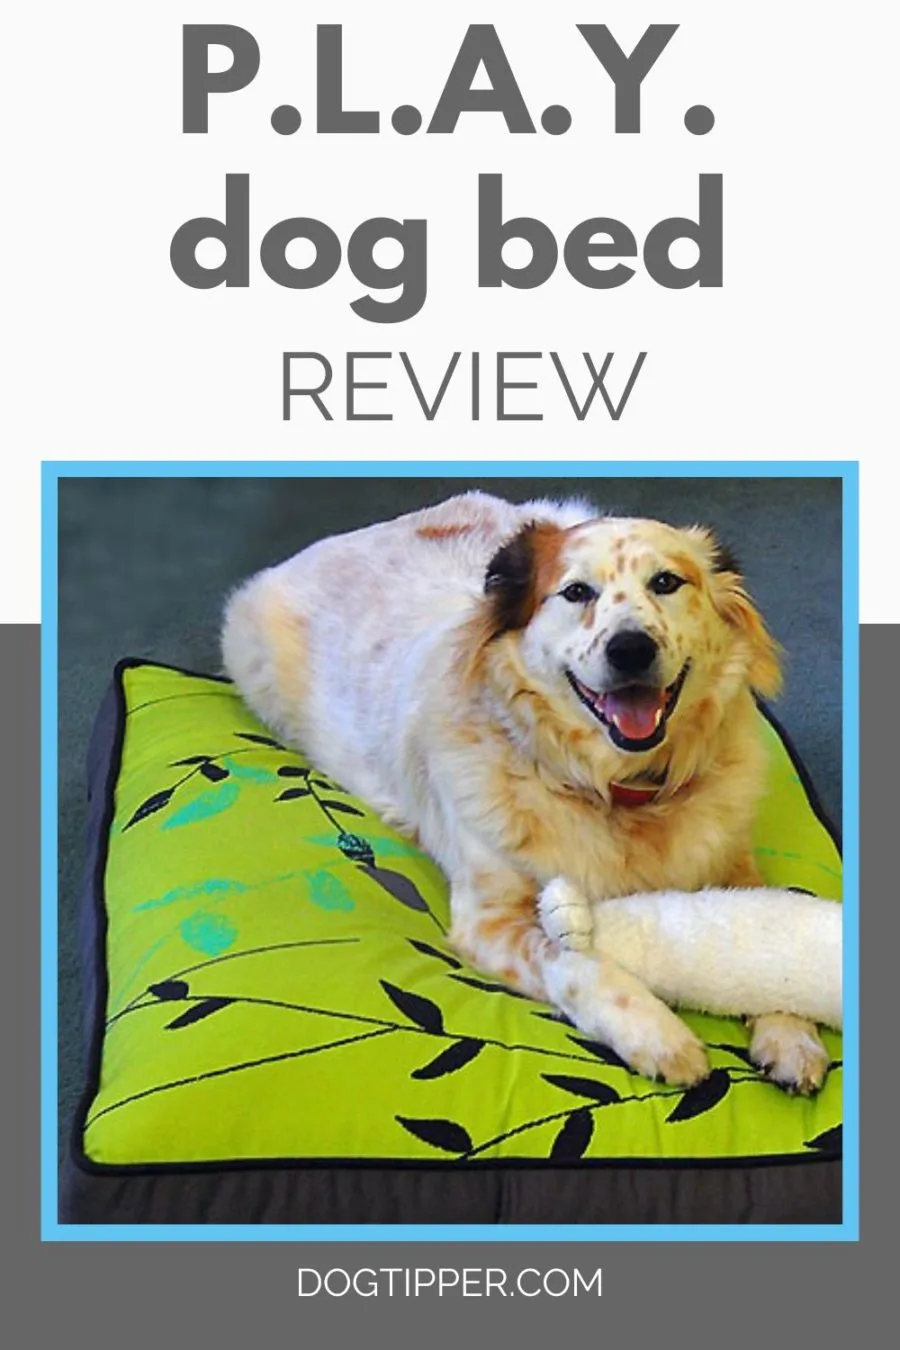 P.L.A.Y. Dog Bed Review